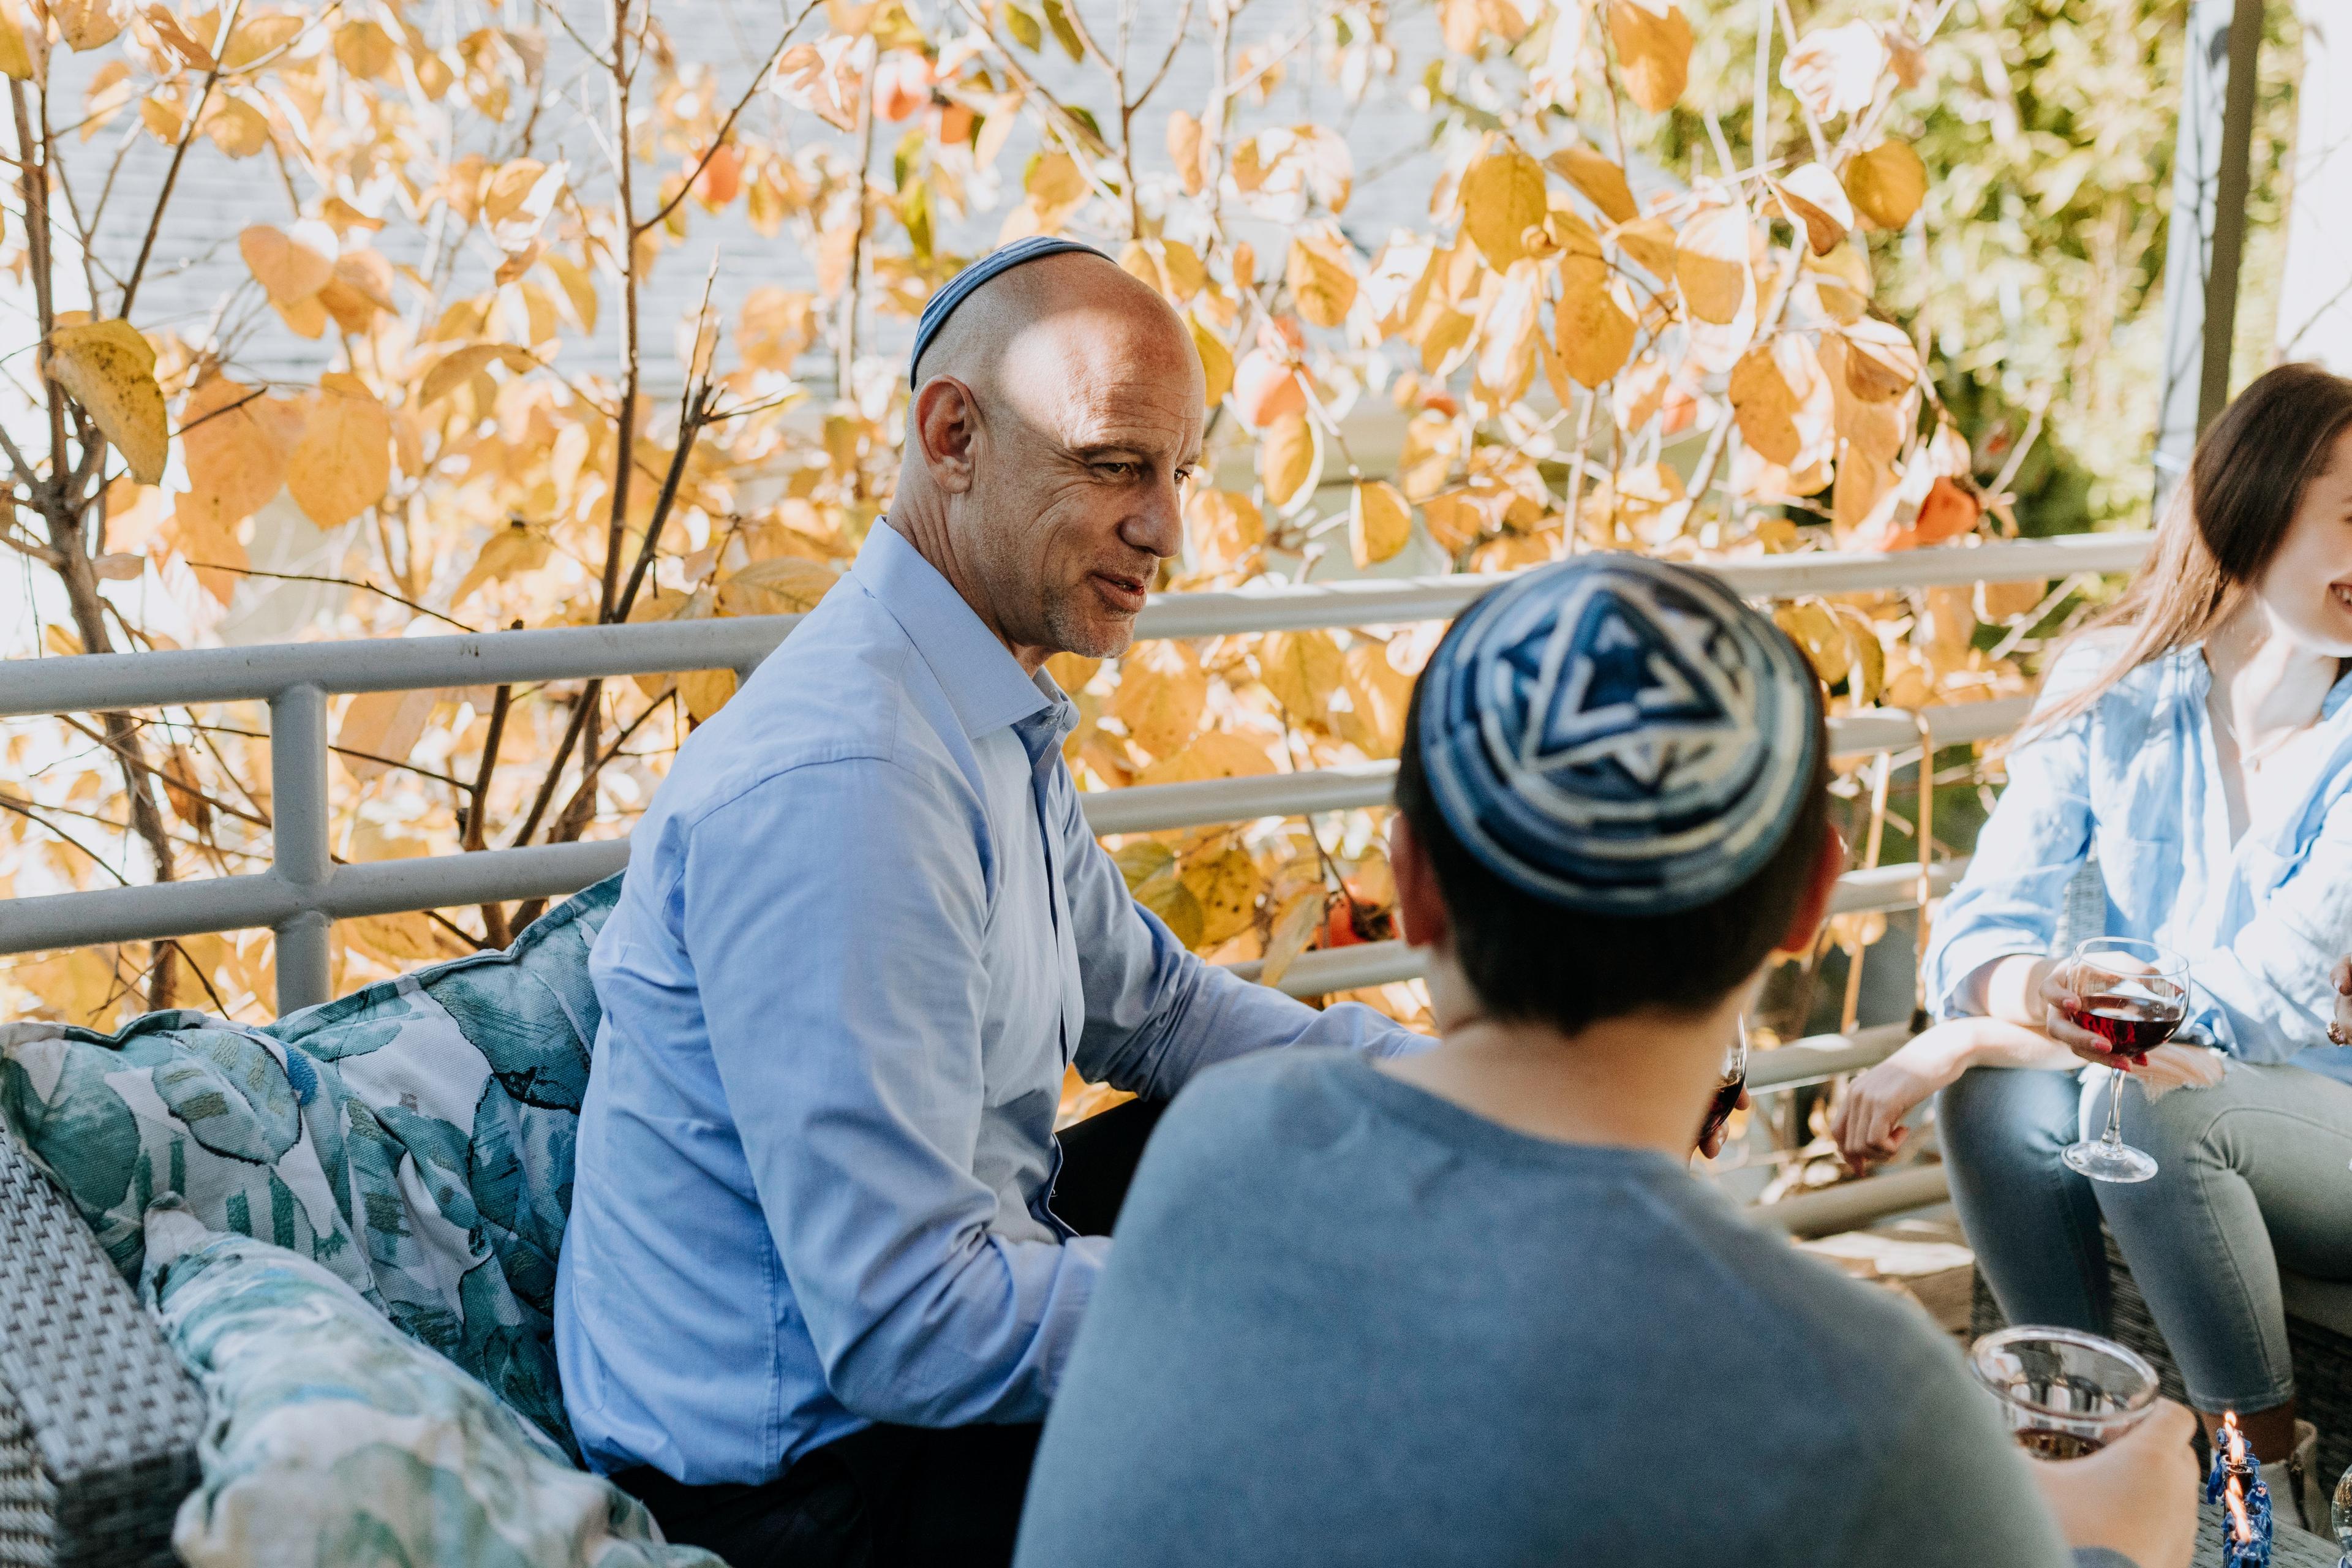 A man and a young boy, both wearing yarmulkes, talk to one another on an outdoor deck